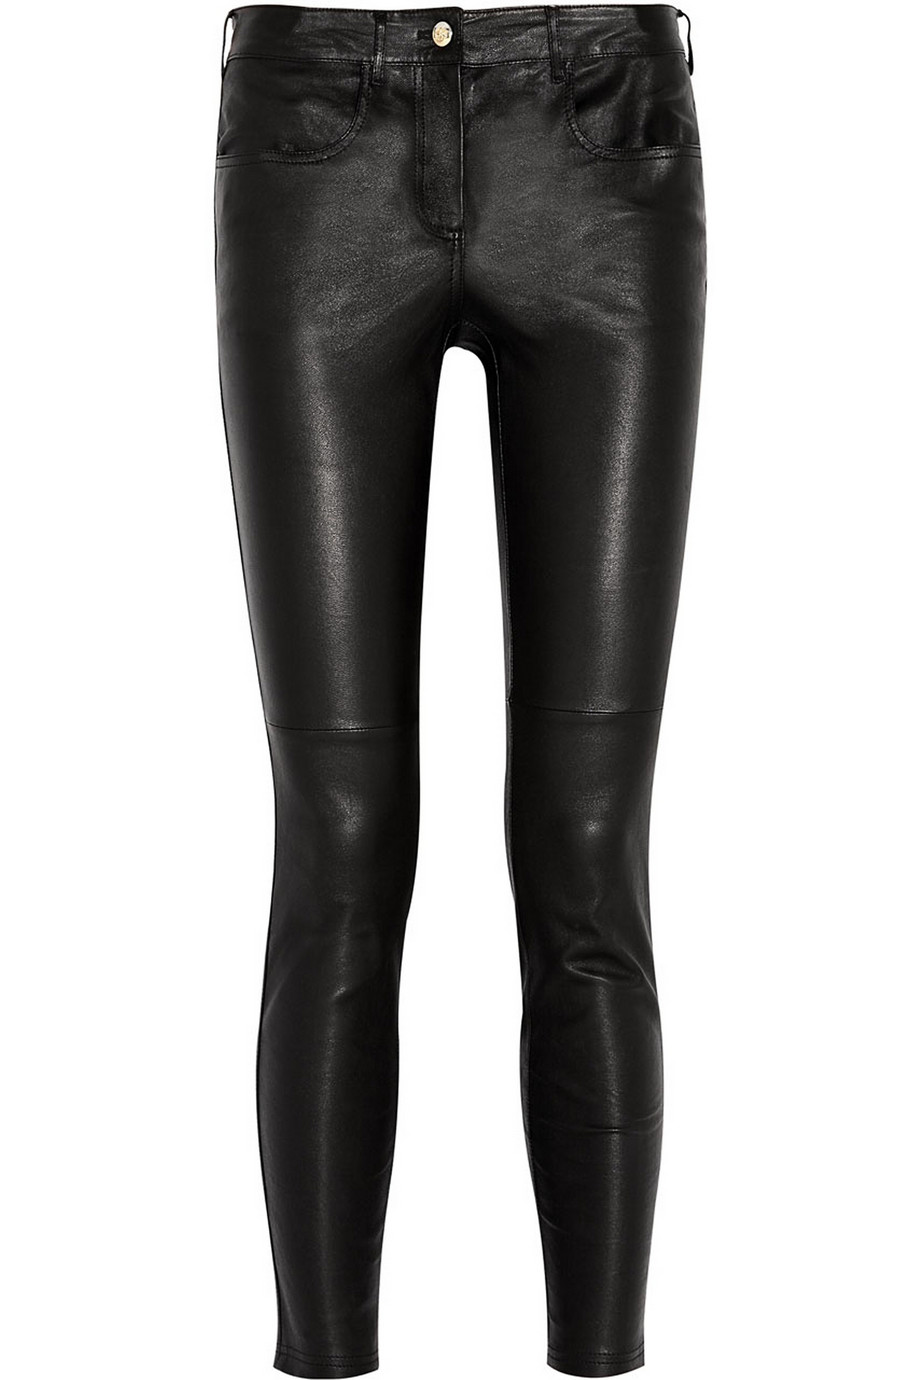 10 best leather pants to buy now and wear forever | the CITIZENS 